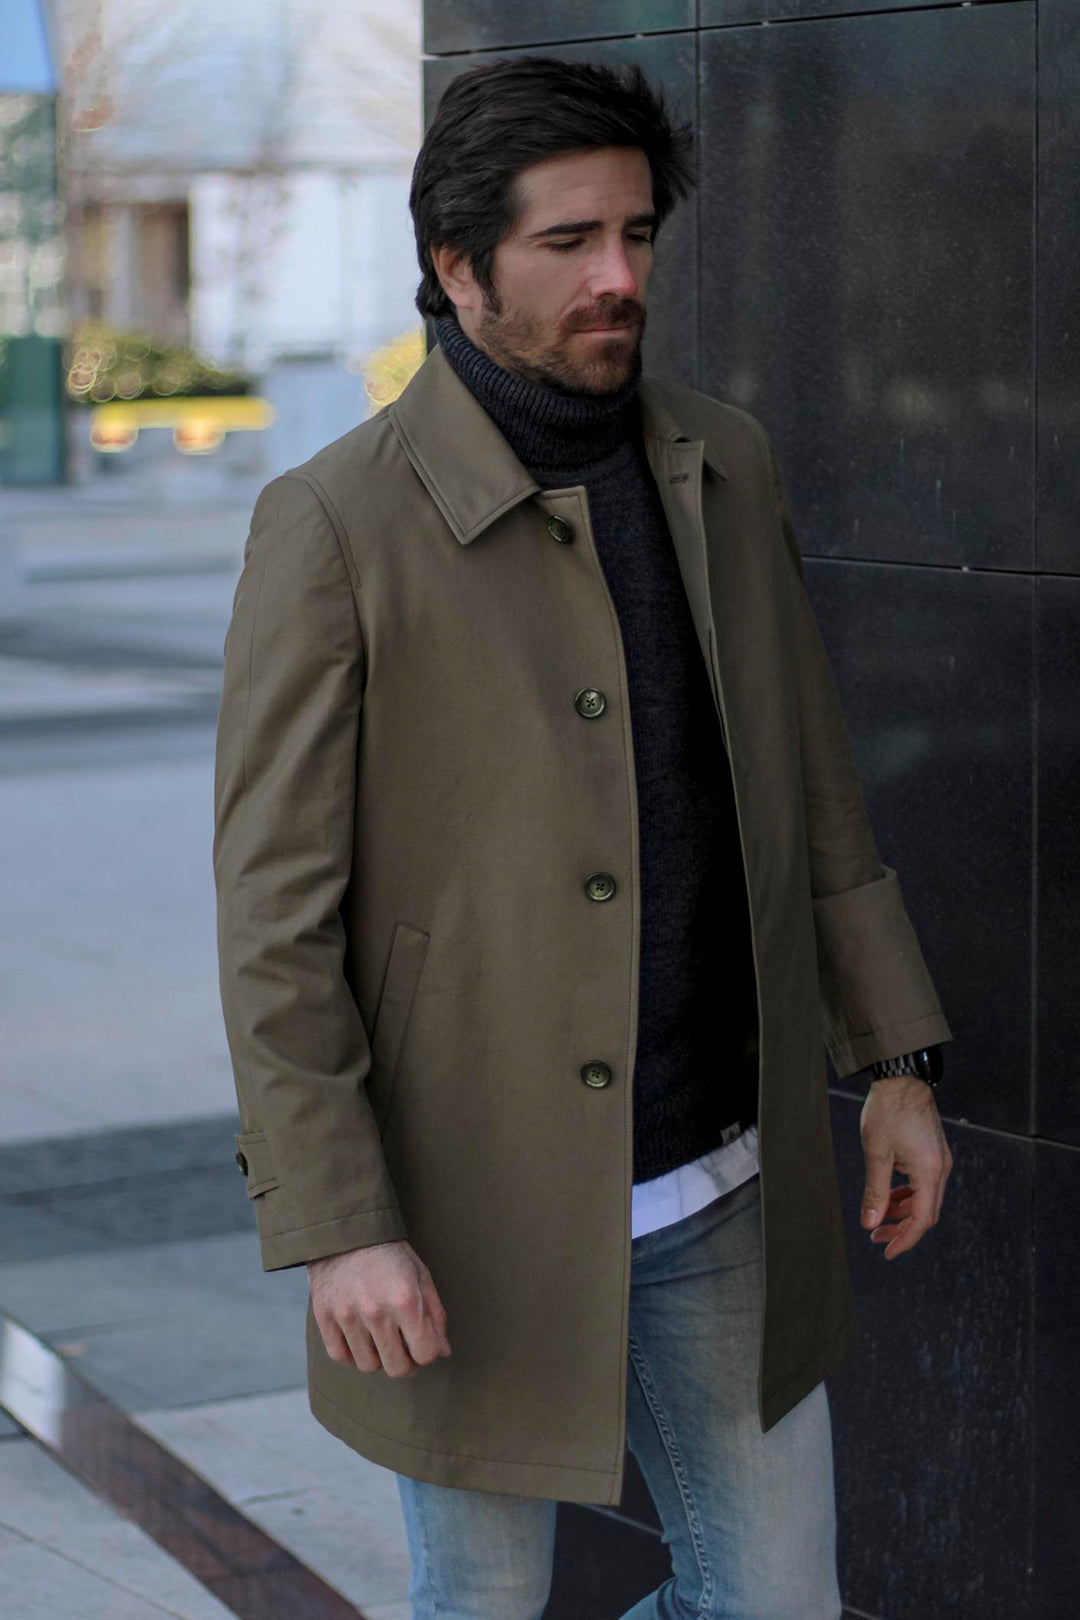 Medium Olive Green 3/4 Trench Coat with Matching Horn Buttons